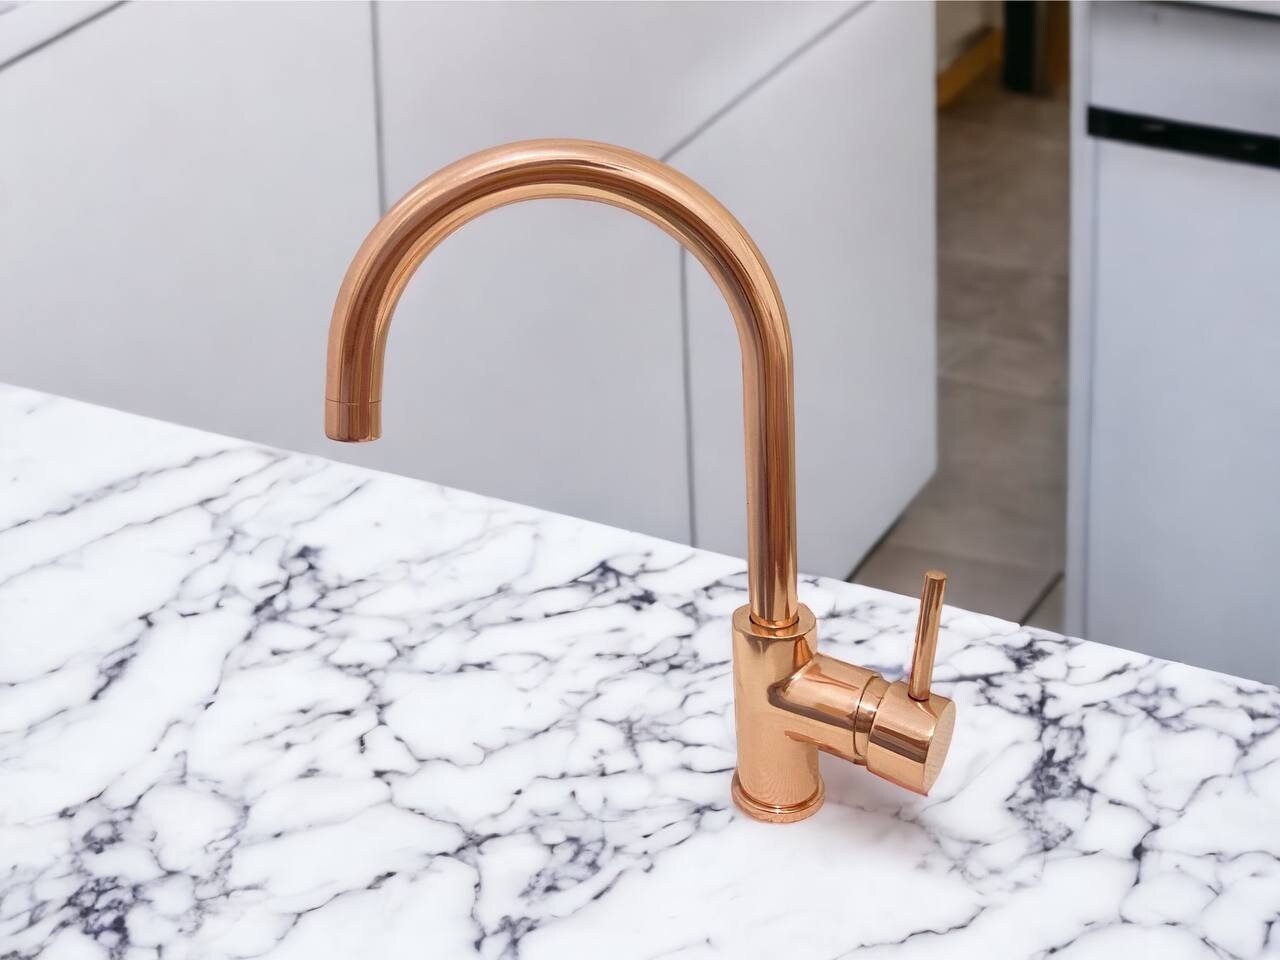 Stylish Copper Faucet for Kitchen